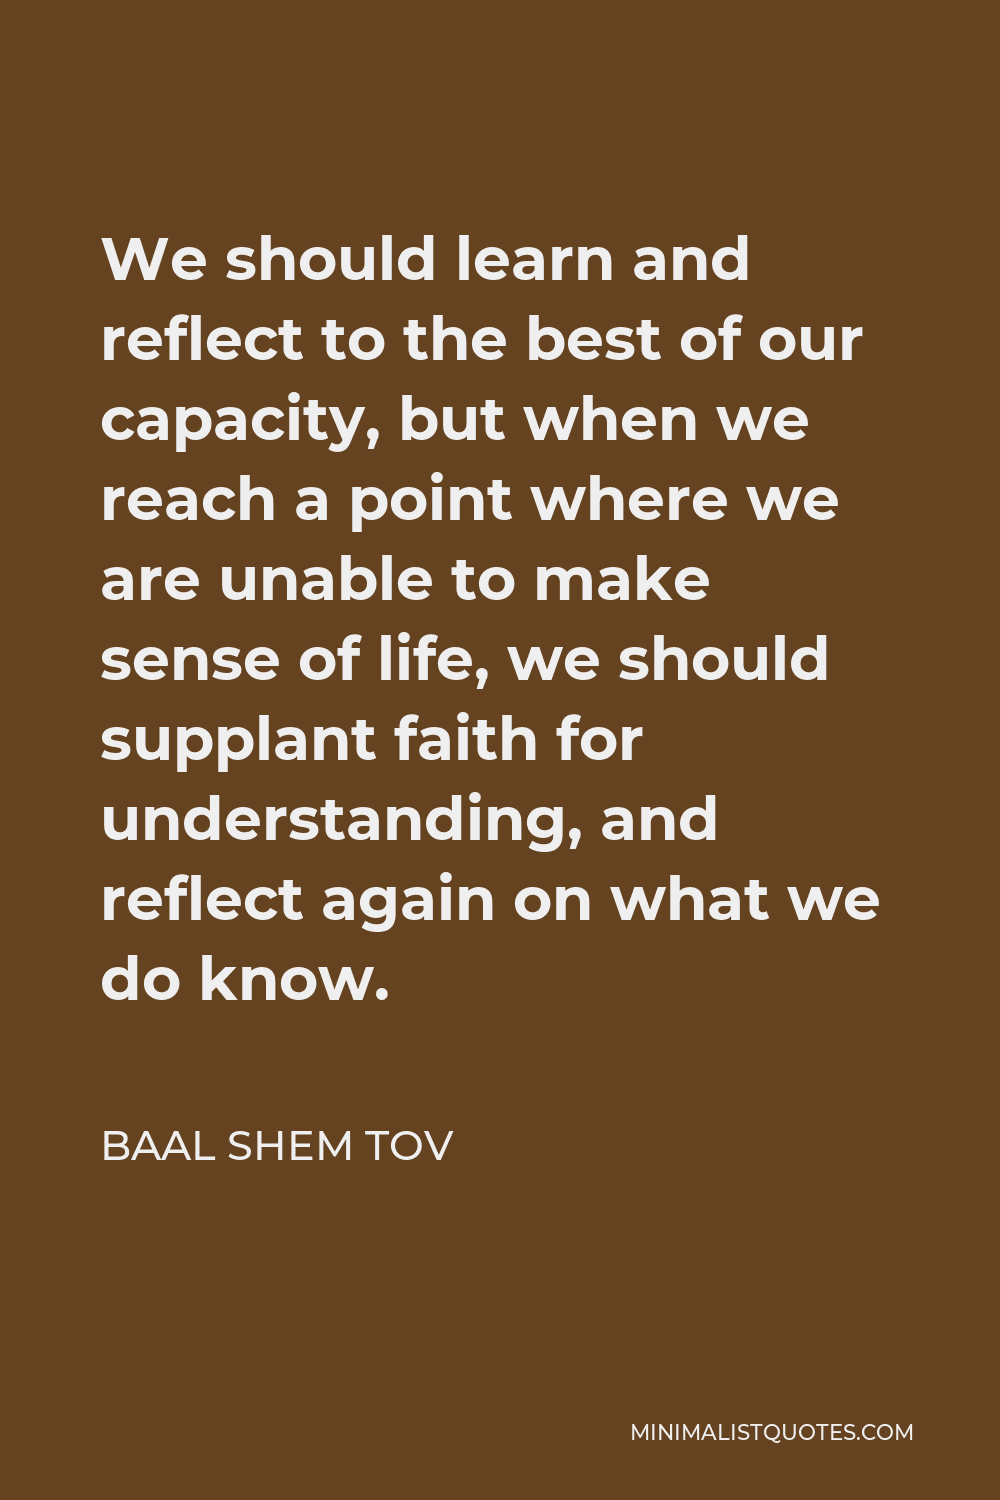 Baal Shem Tov Quote - We should learn and reflect to the best of our capacity, but when we reach a point where we are unable to make sense of life, we should supplant faith for understanding, and reflect again on what we do know.